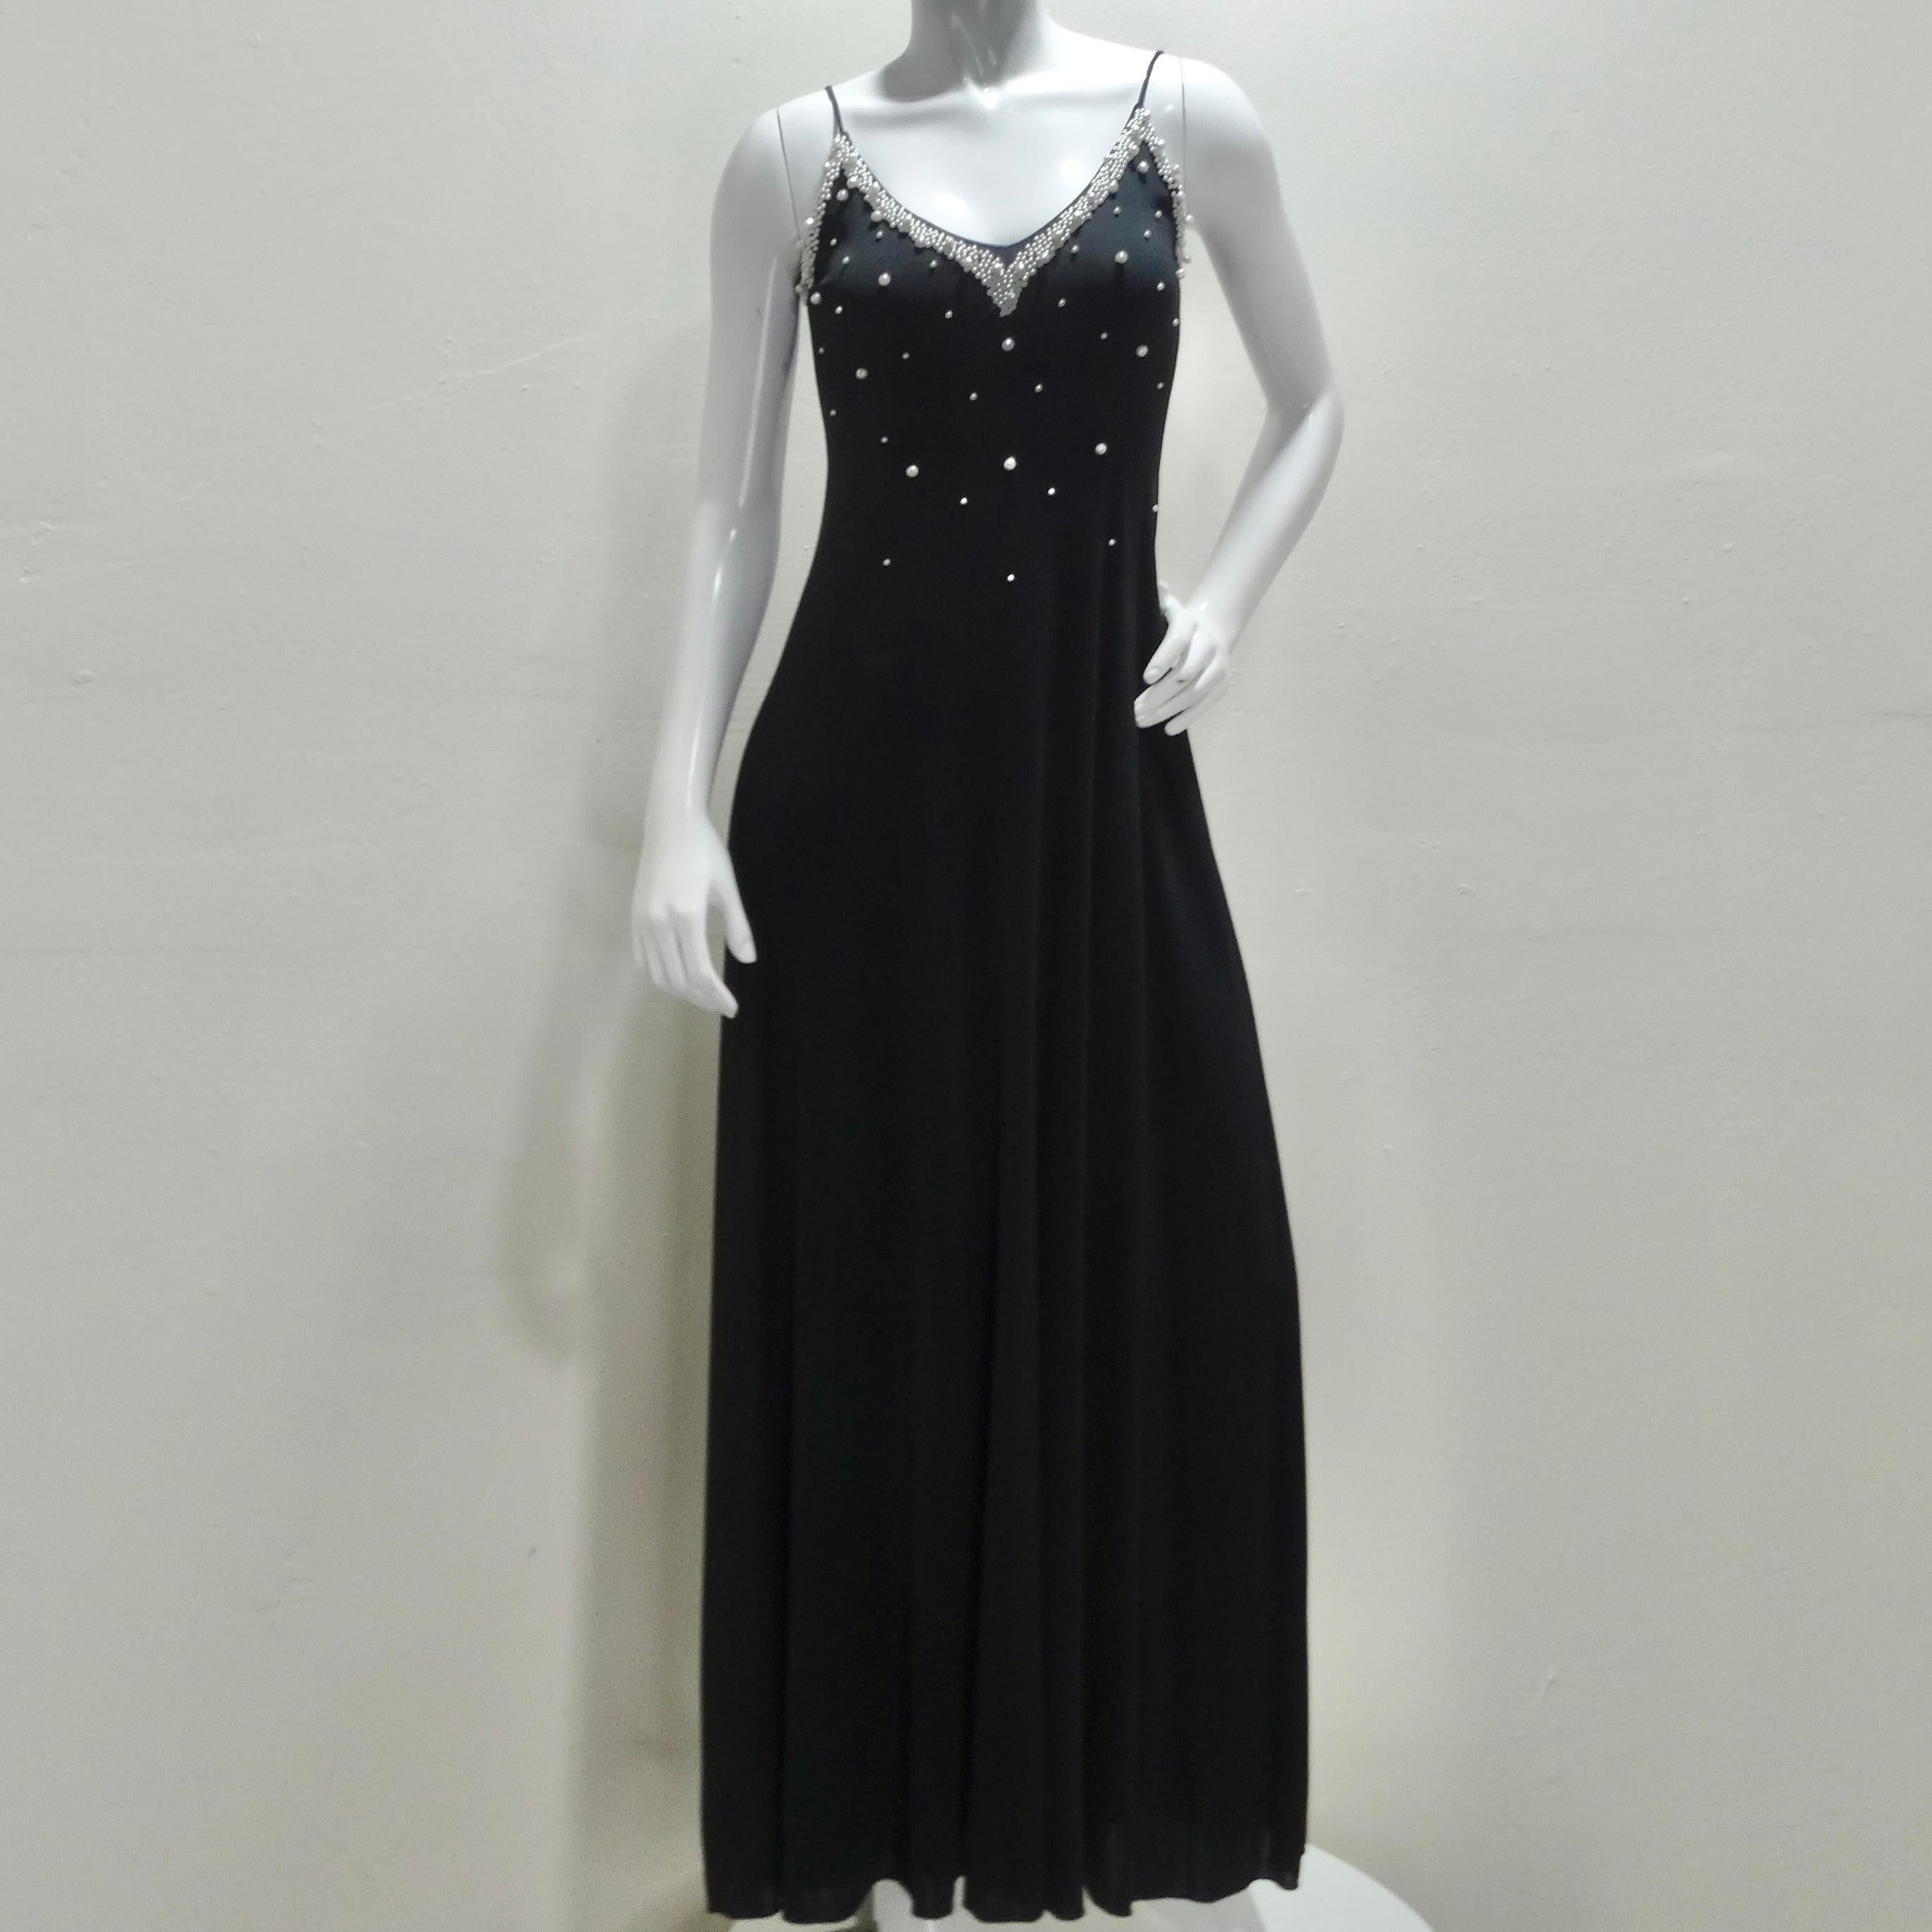 Experience the epitome of vintage glamour with this stunning 1980s Black Pearl Beaded Maxi Dress and Cardigan Set. This ensemble exudes sophistication and timeless charm, featuring an exquisite slip-style black maxi dress adorned with clusters of